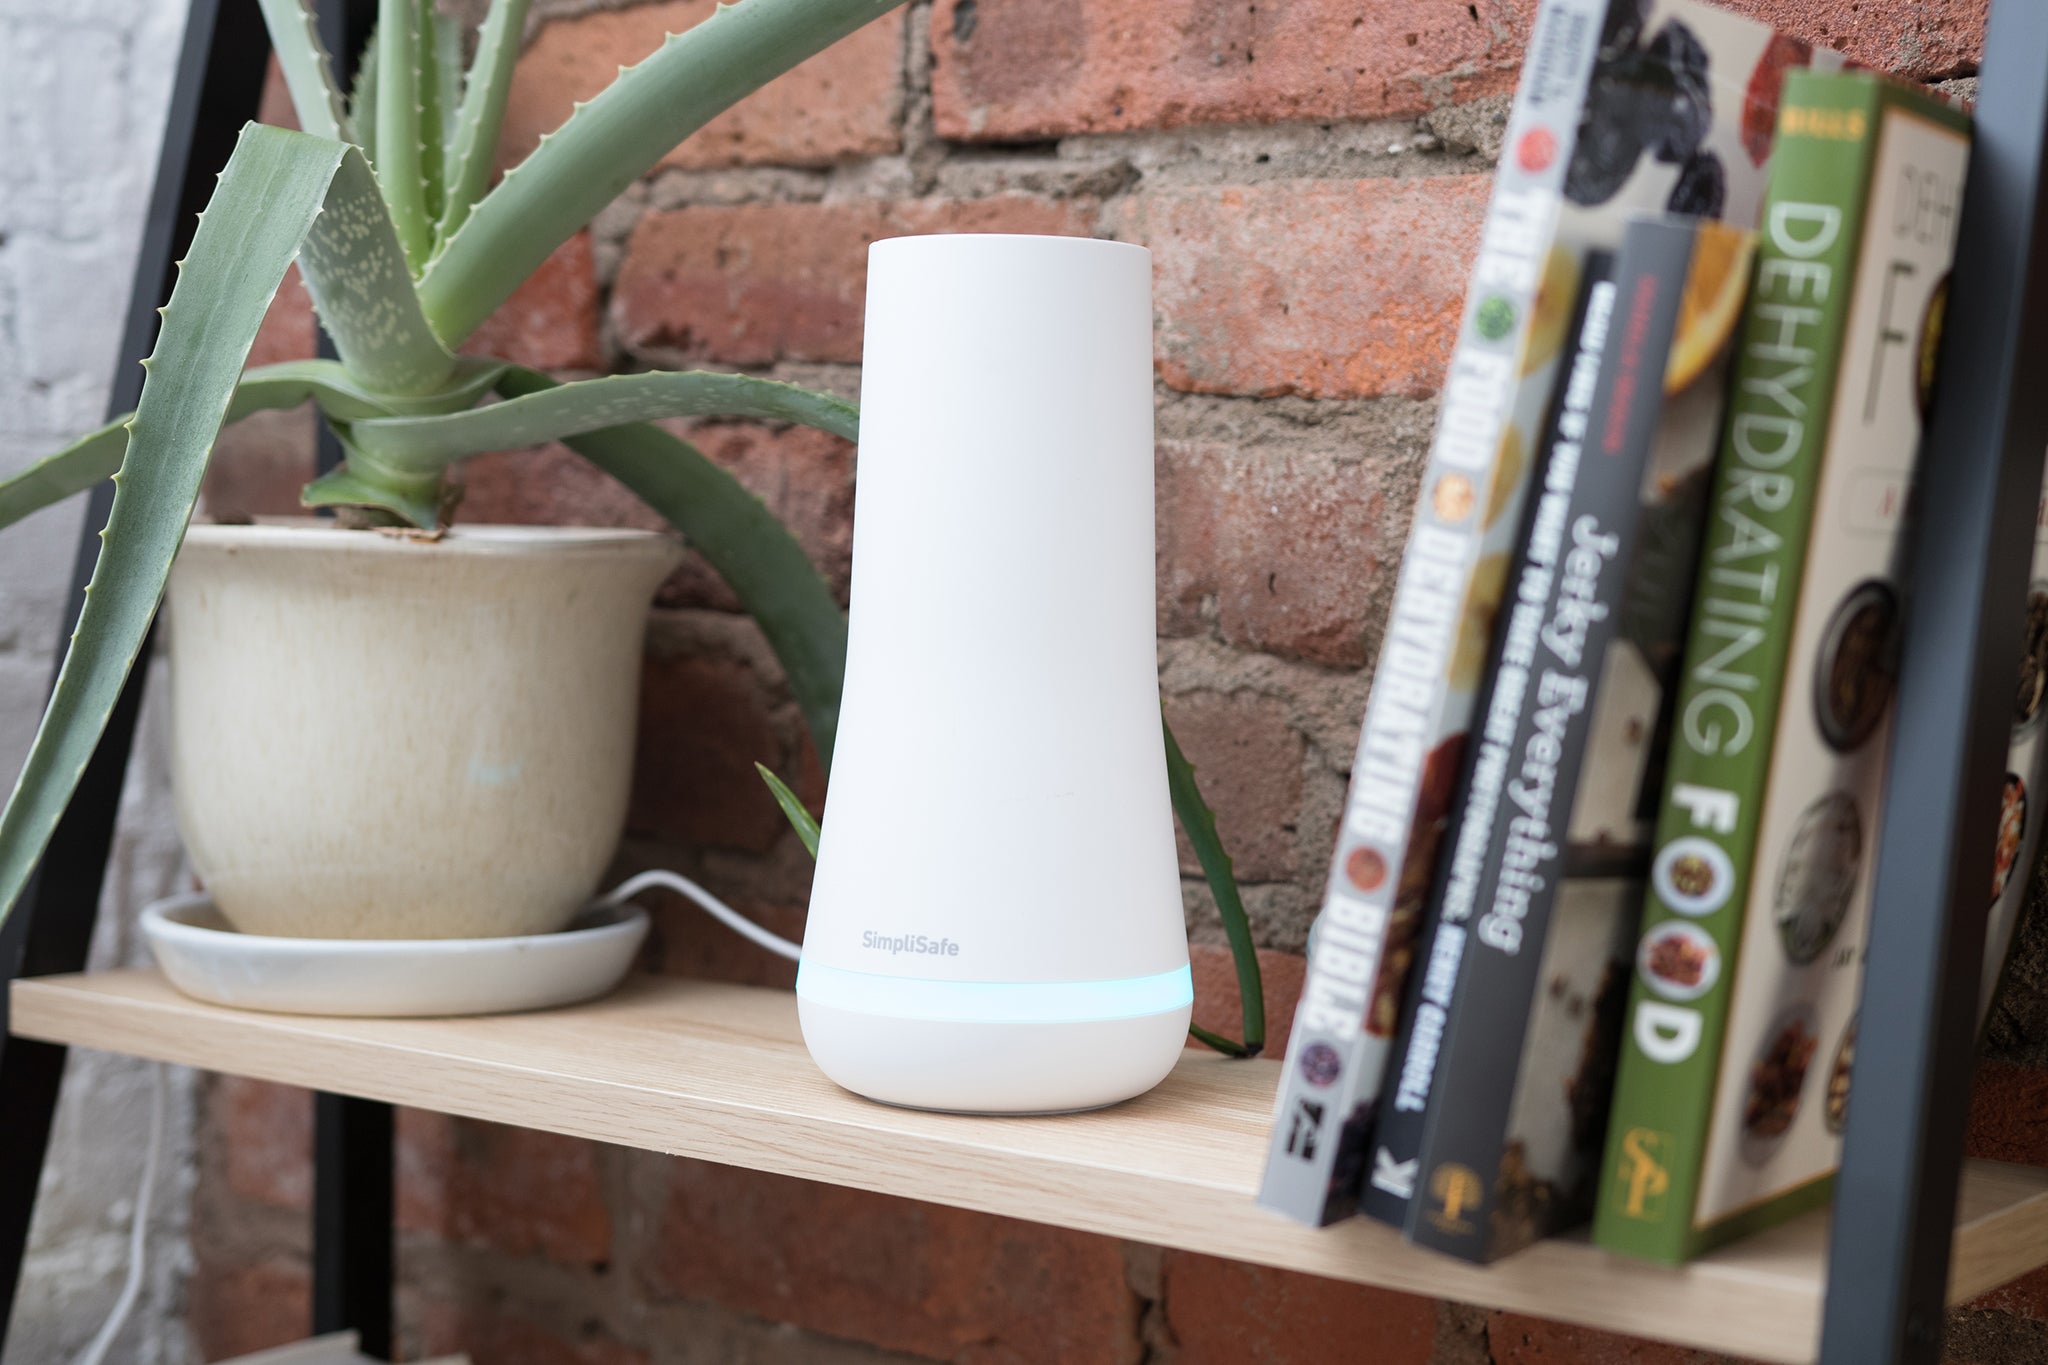 How To Connect Simplisafe To Google Home